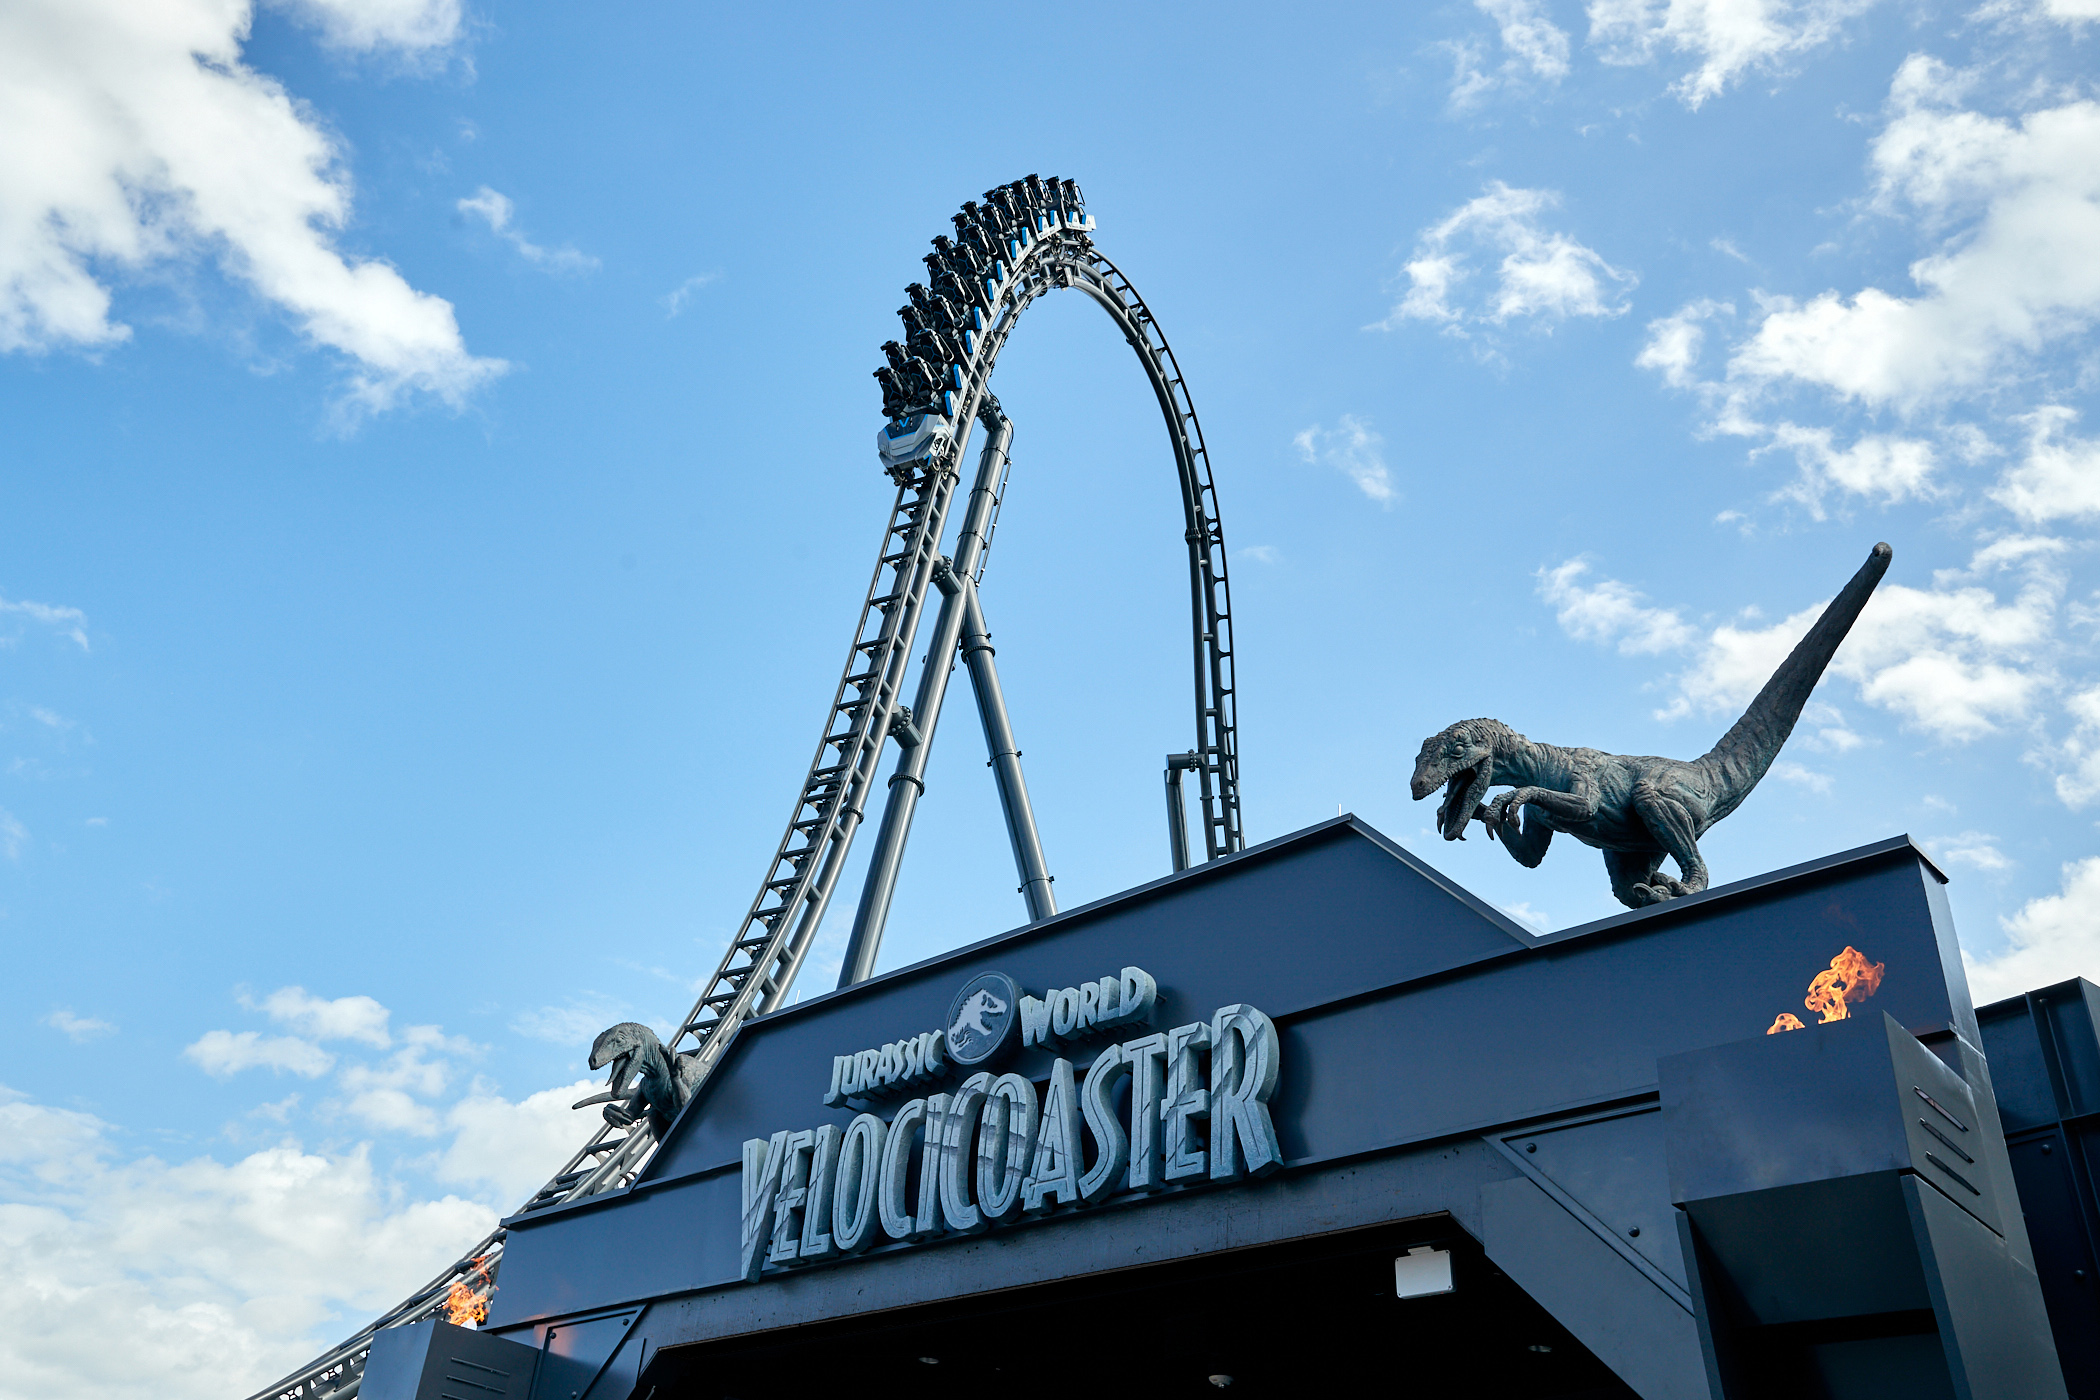 Universal's Jurassic World Velocicoaster Faces Possible Long-Term Closure